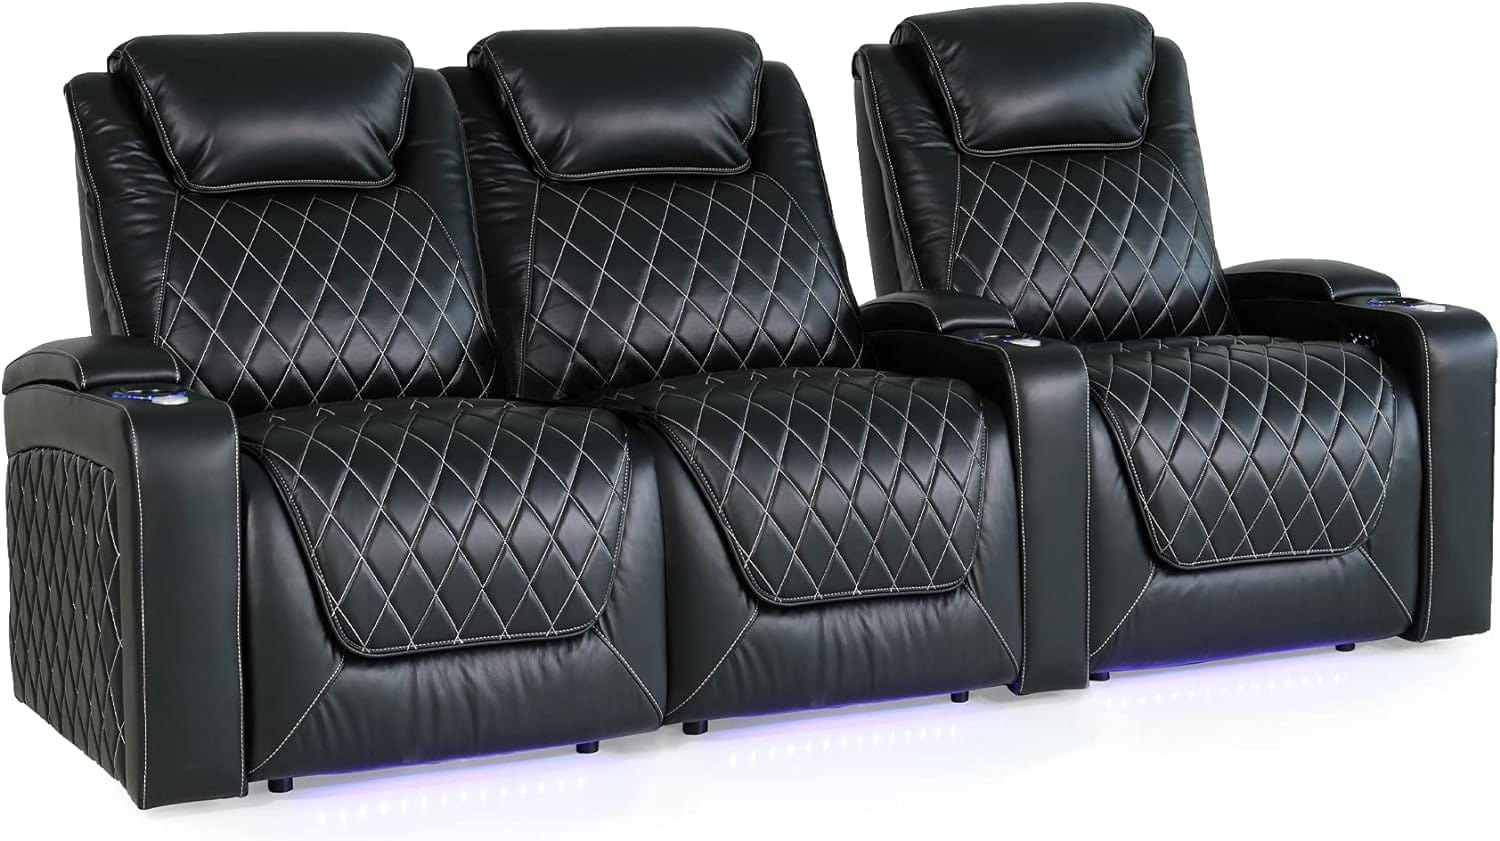 by Valencia Seating Sofa Row of 3 - Loveseat Left | Width: 97.5" Height: 45" Depth: 38" / MIdnight Black / Regular Spec (300 LBs Sitting Weight Limit) Valencia Oslo XL Home Theater Seating